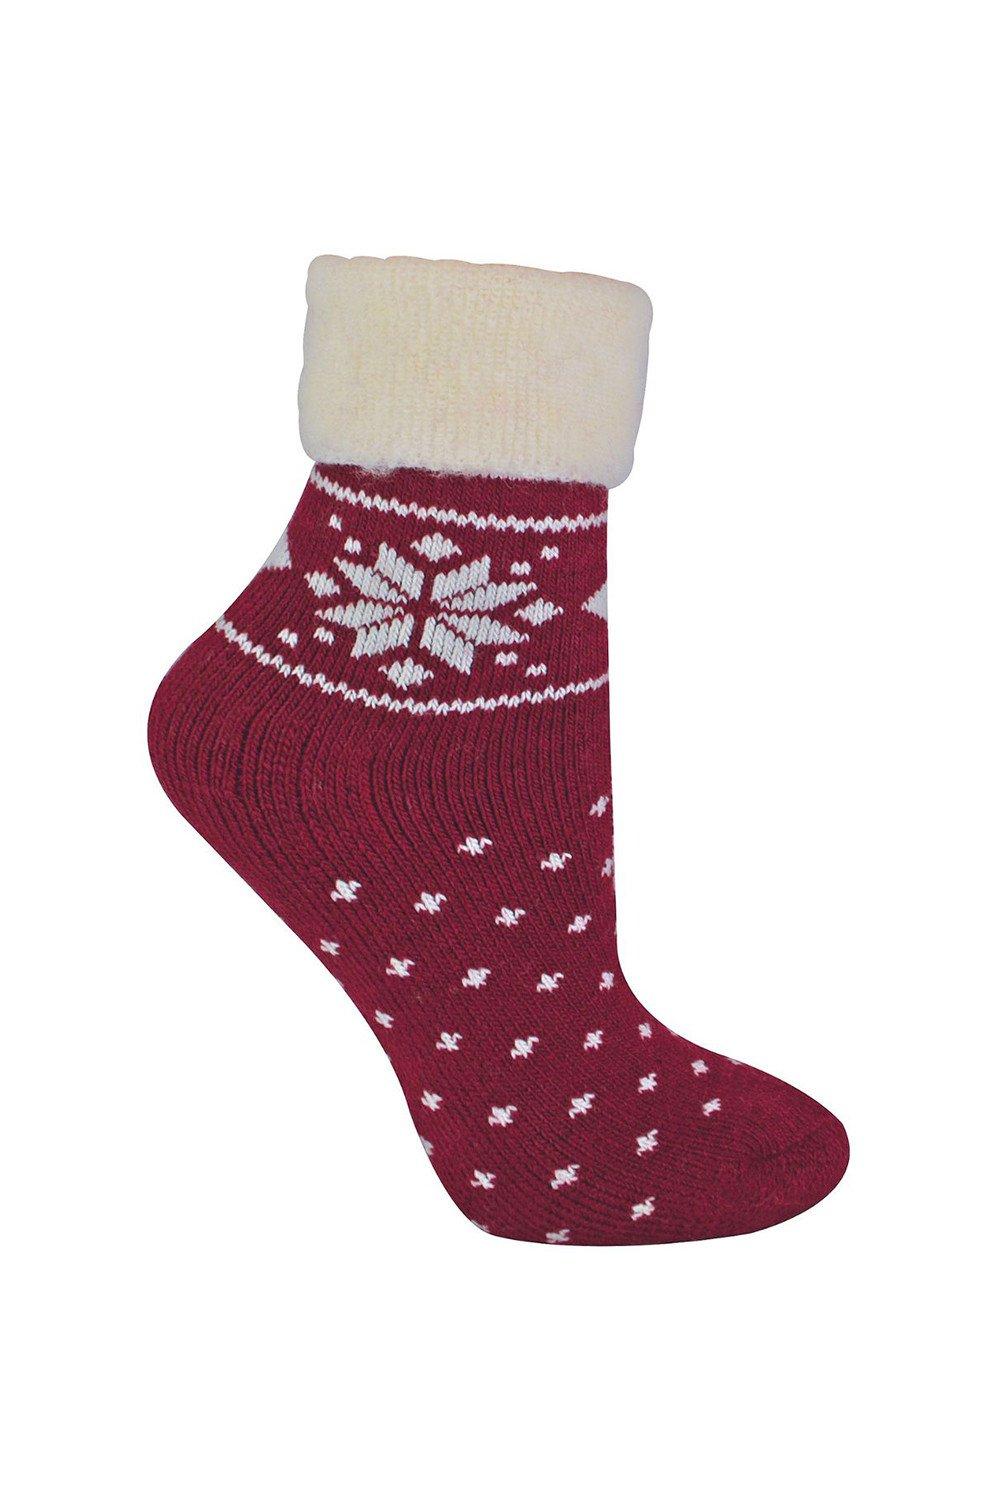 Wool Bed Lounge Socks with Fairisle Design for Winter